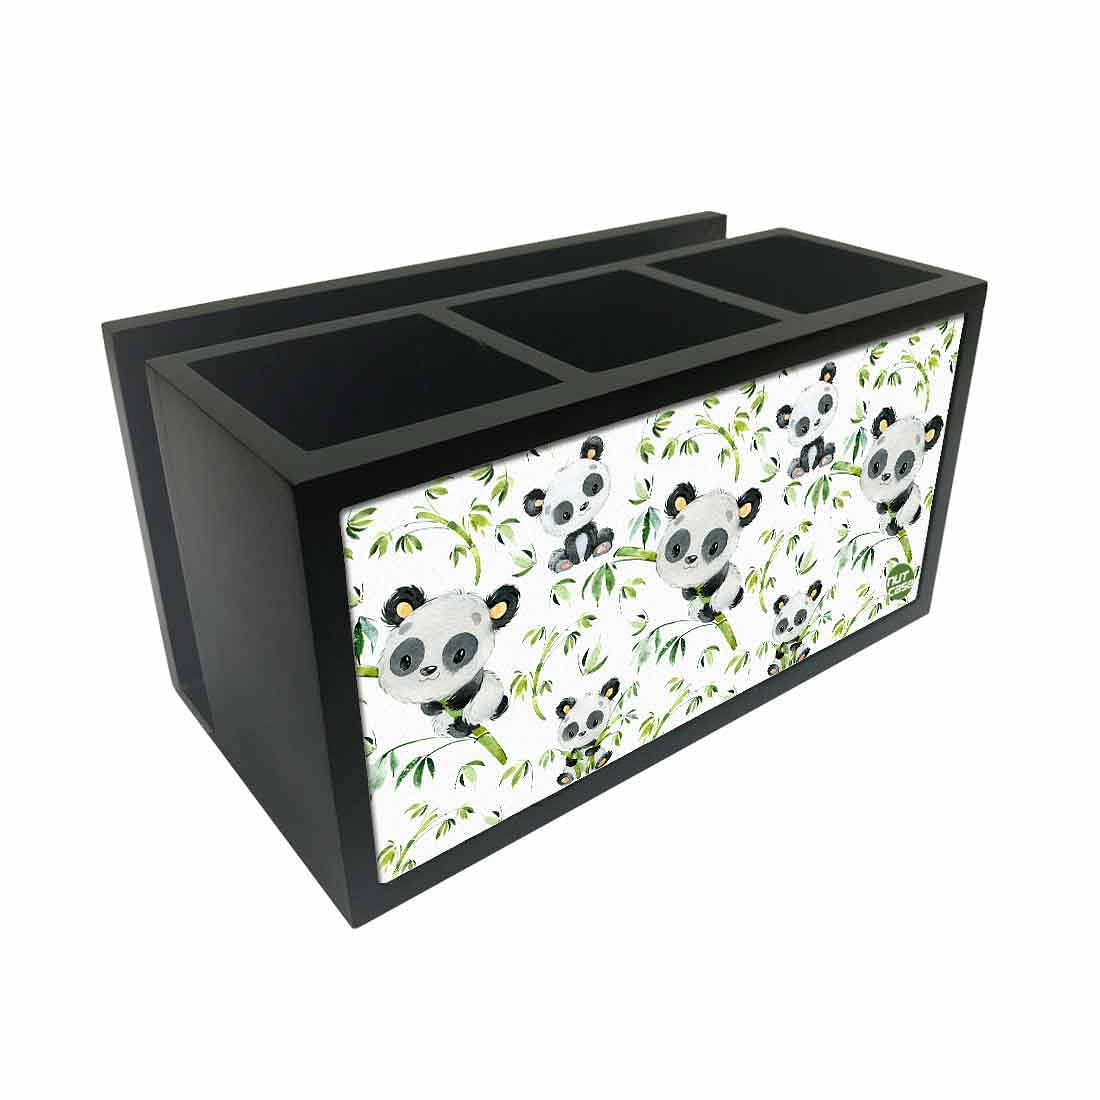 Nutcase Designer Cutlery Tissue Holder Stand Napkin Spoons Forks Knives Organizer - (Cutlery NOT Included) -Made in India - Cute Panda Nutcase